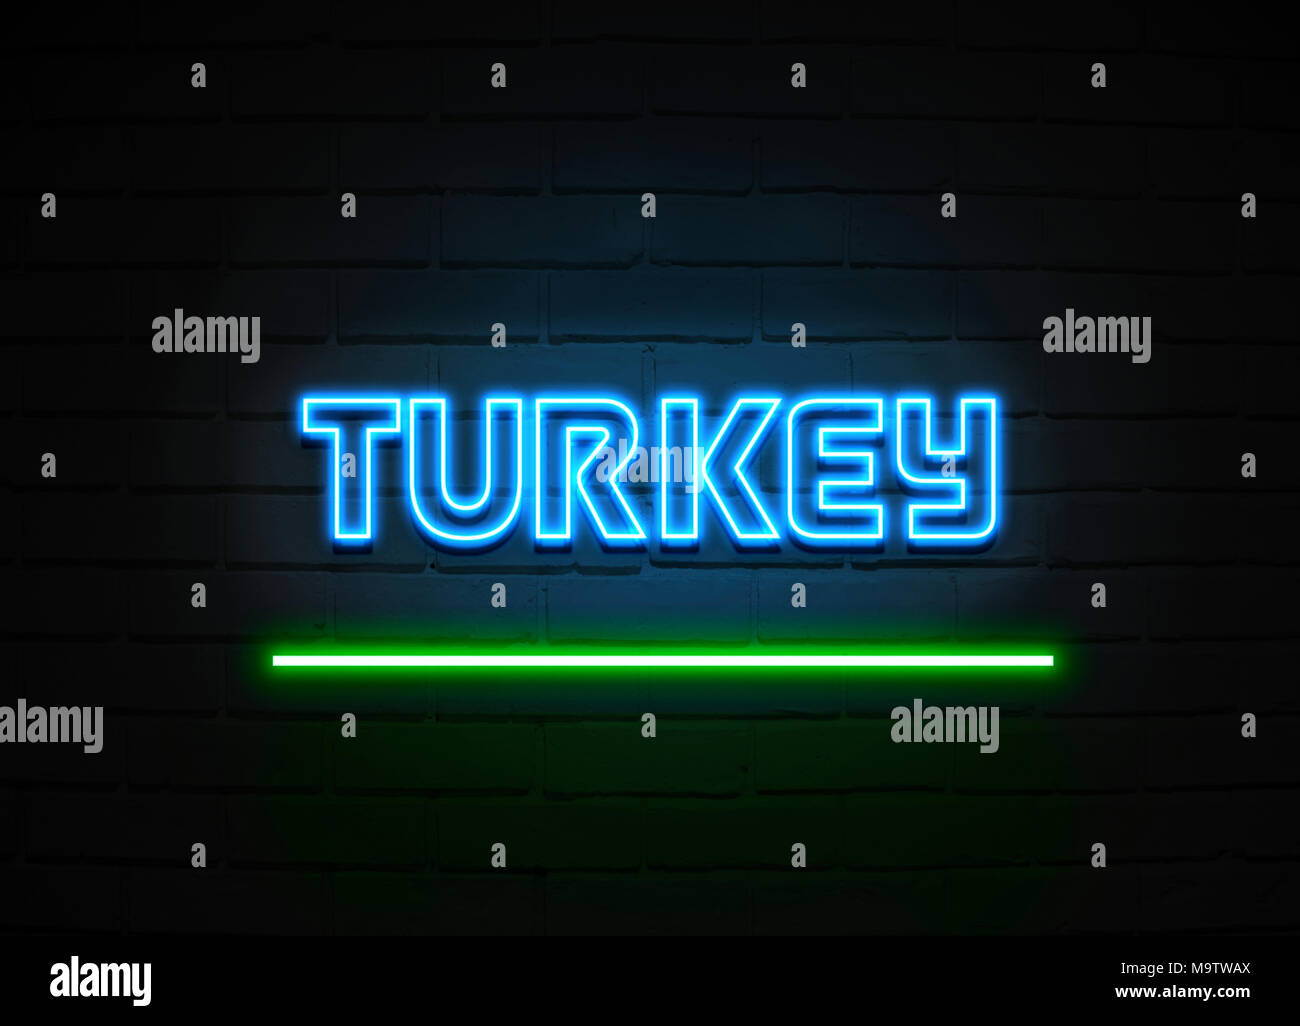 Turkey neon sign - Glowing Neon Sign on brickwall wall - 3D rendered royalty free stock illustration. Stock Photo